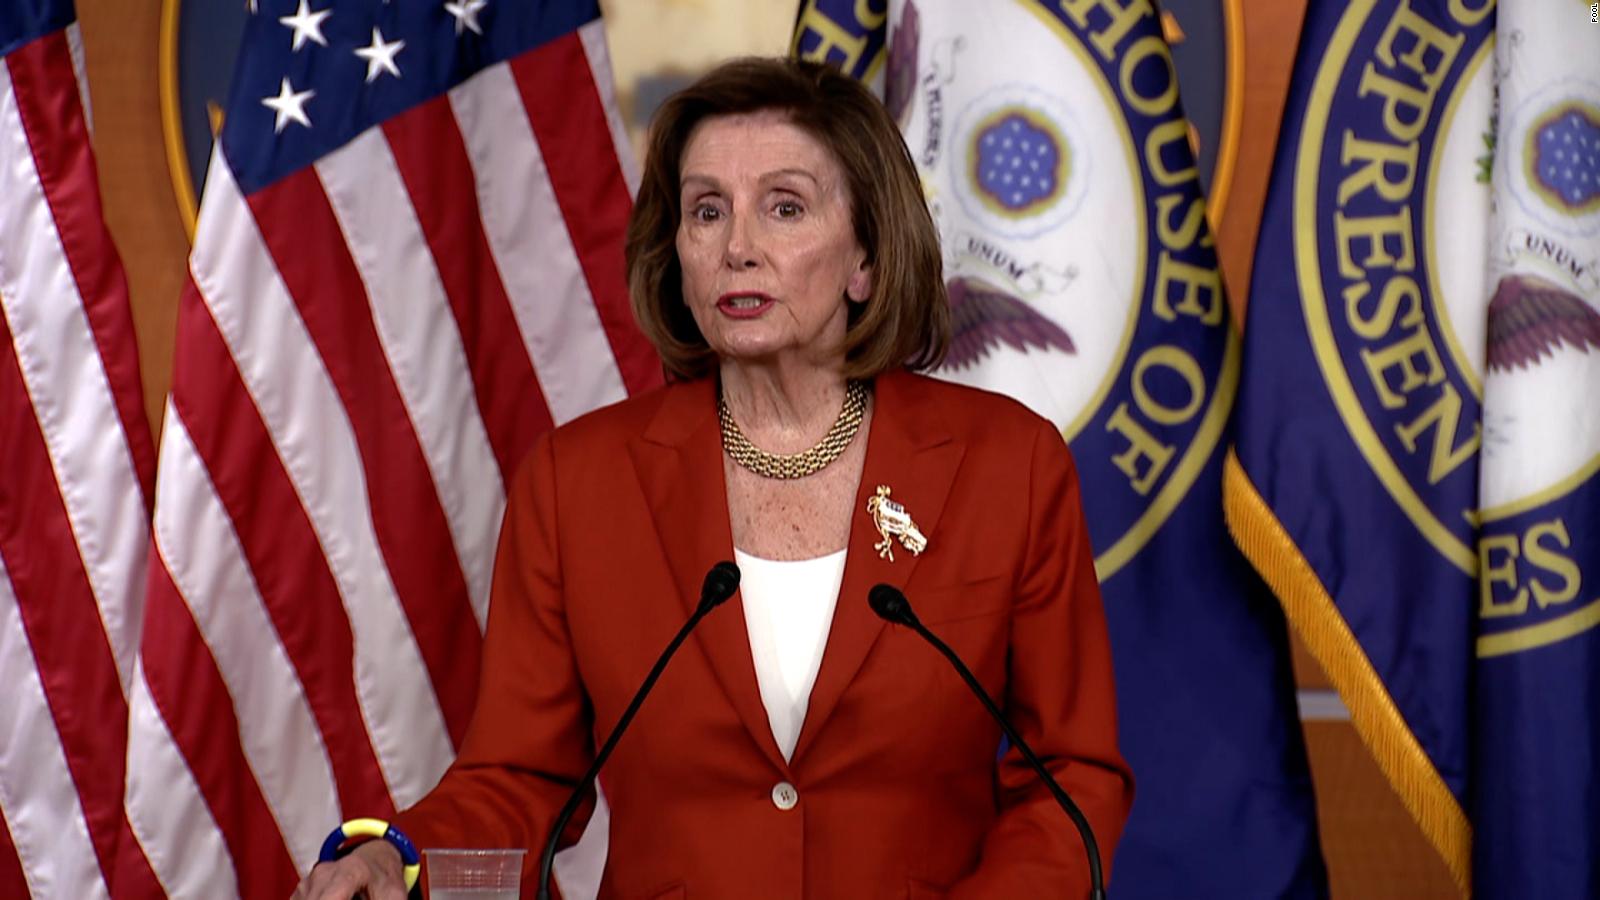 Pelosi on abortion: "Women have fewer rights than their mothers"